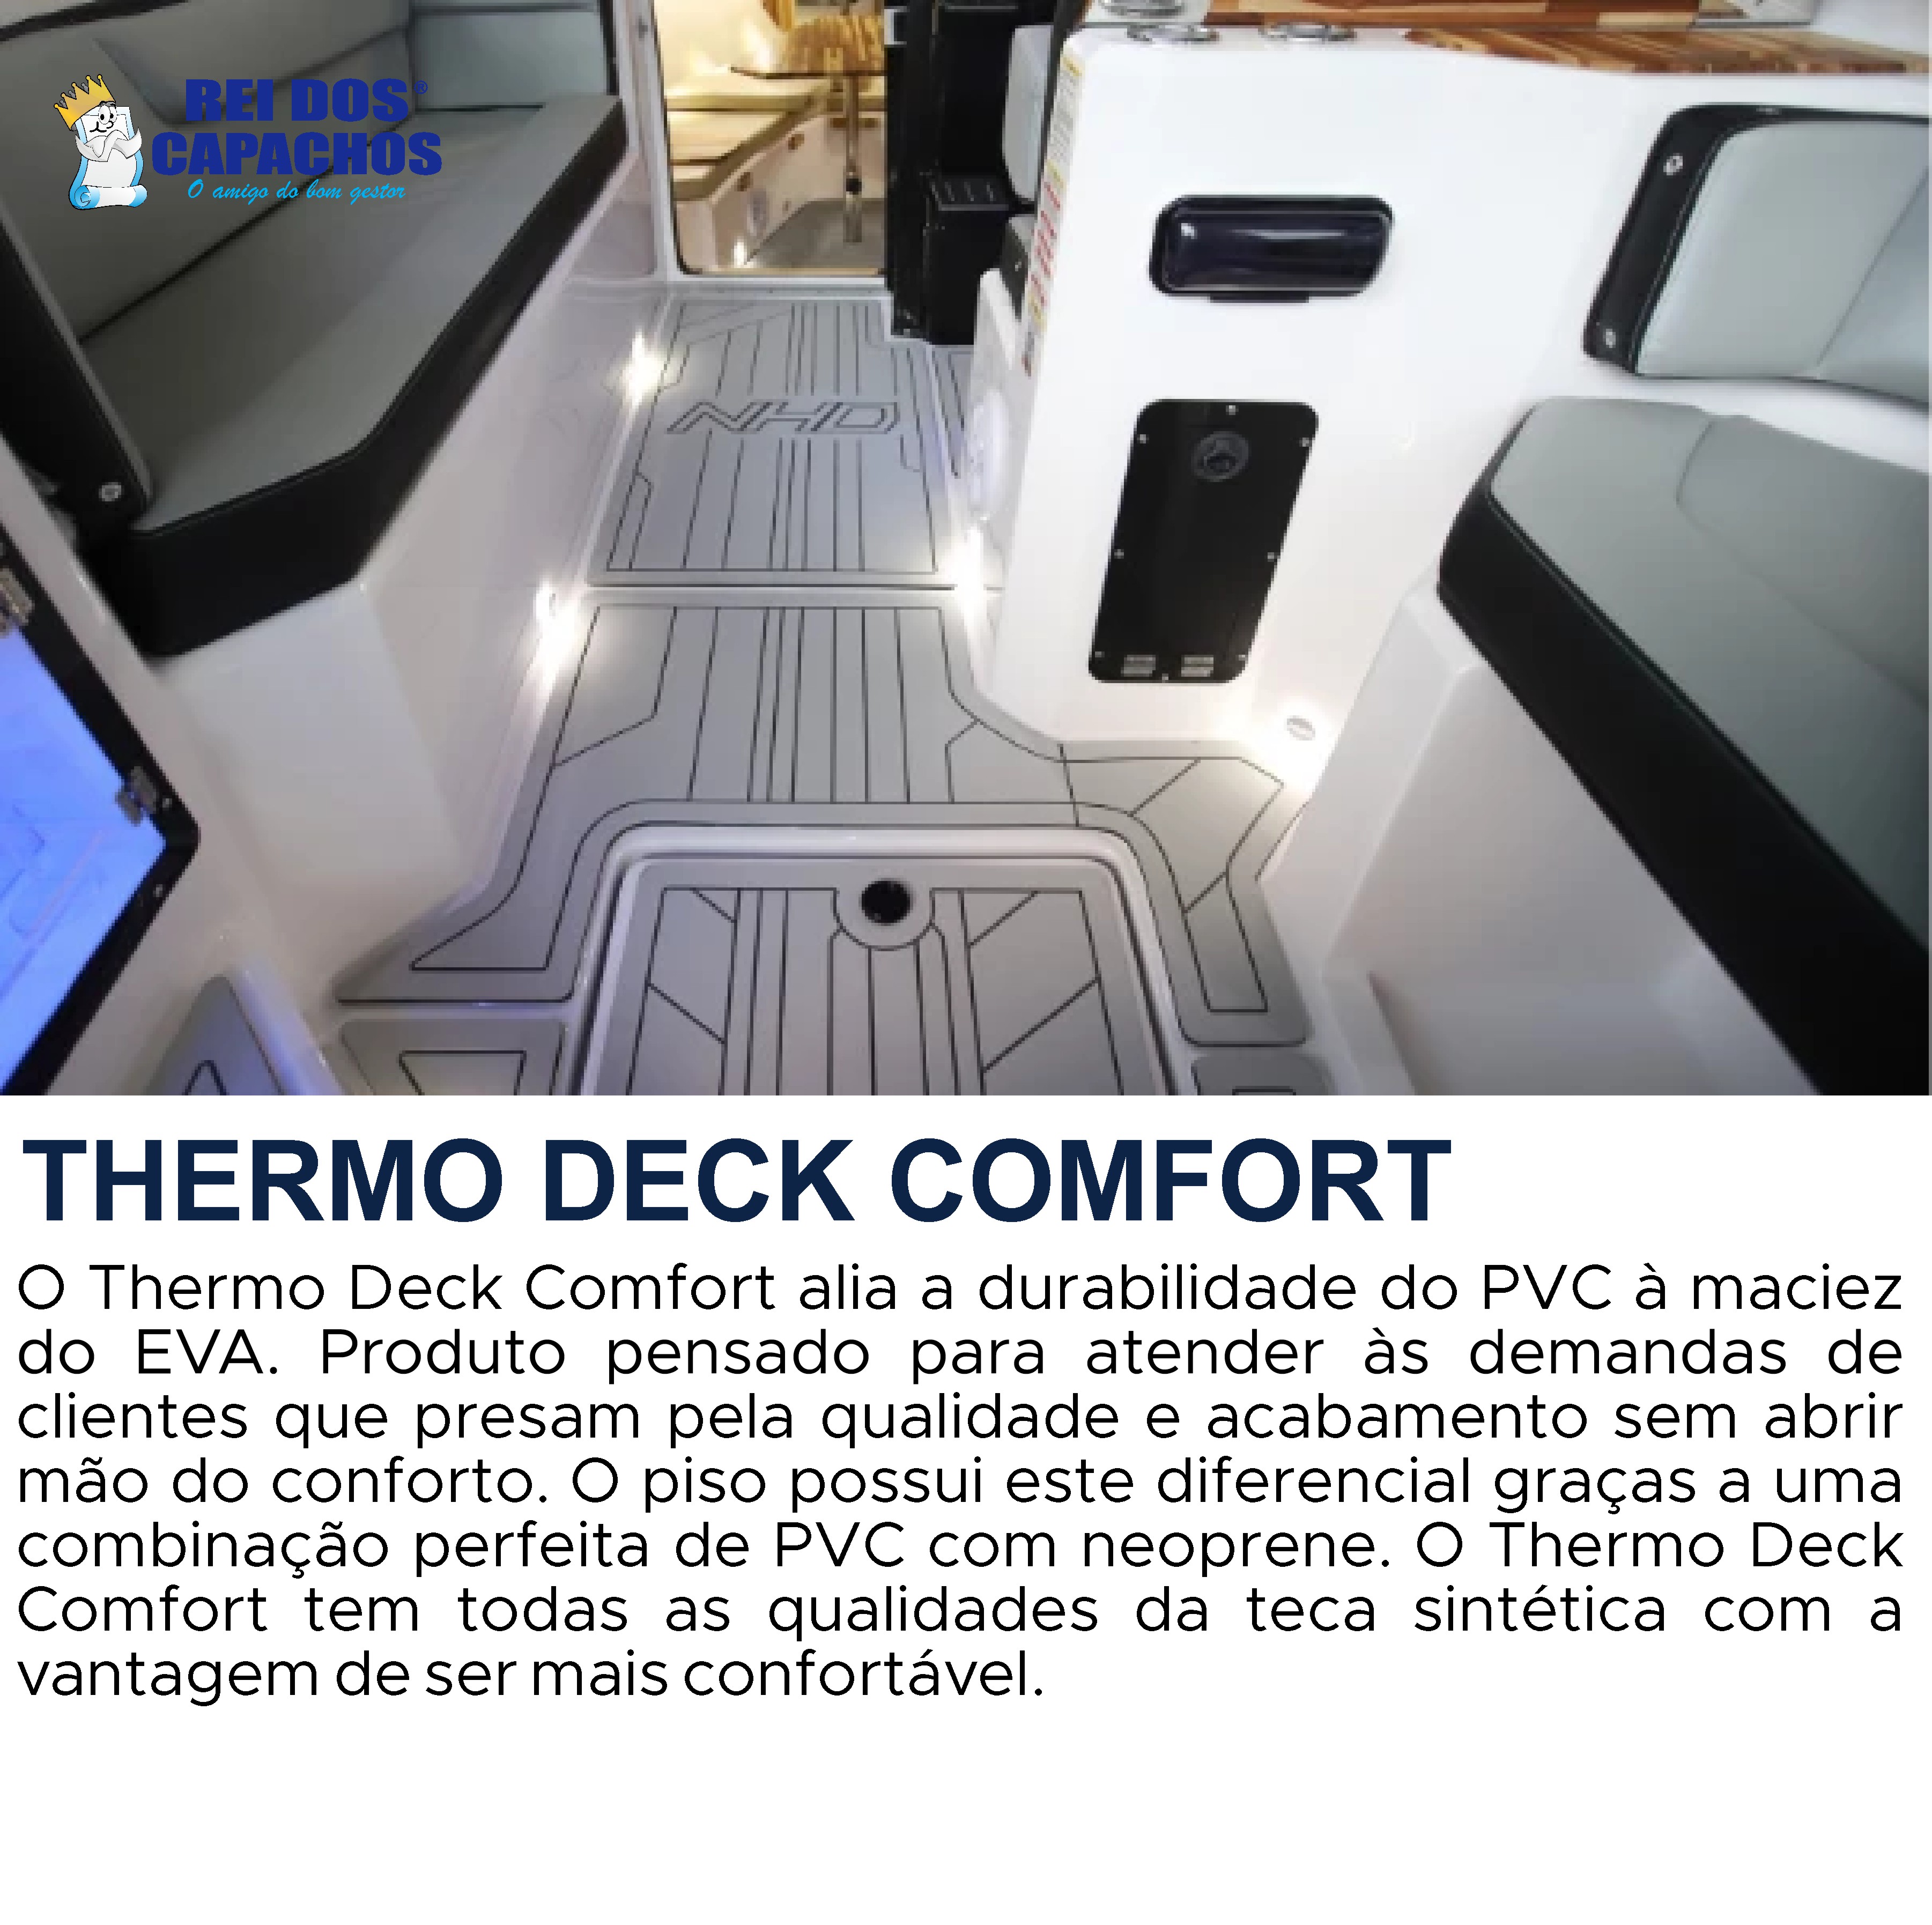 TAPETE PVC THERMO DECK COMFORT PARA ECOMARINER 44 - CABINE